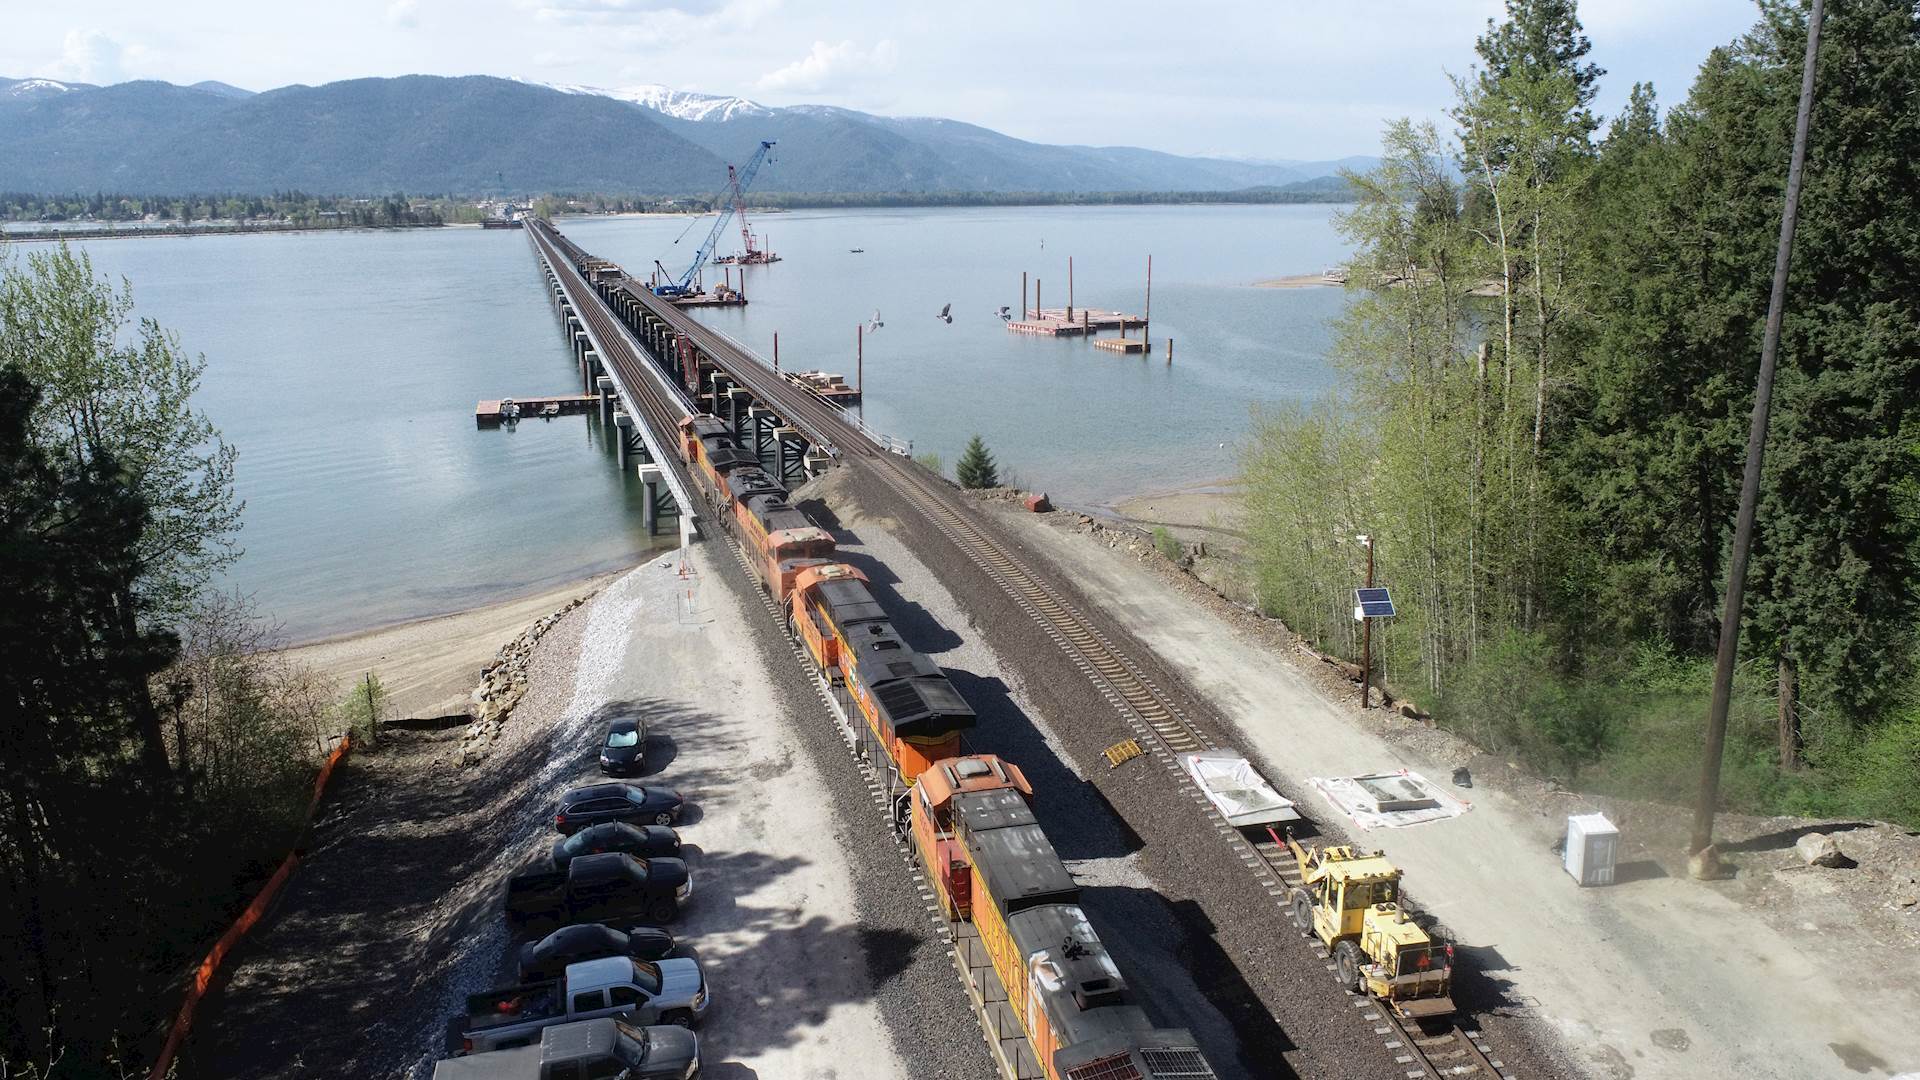 Aerial view of two train tracks leading to their crossing over a lake, with mountains in the background. A train is on one track while the lake bridge of the other track is being constructed. Two construction cranes on barges are on the lake.